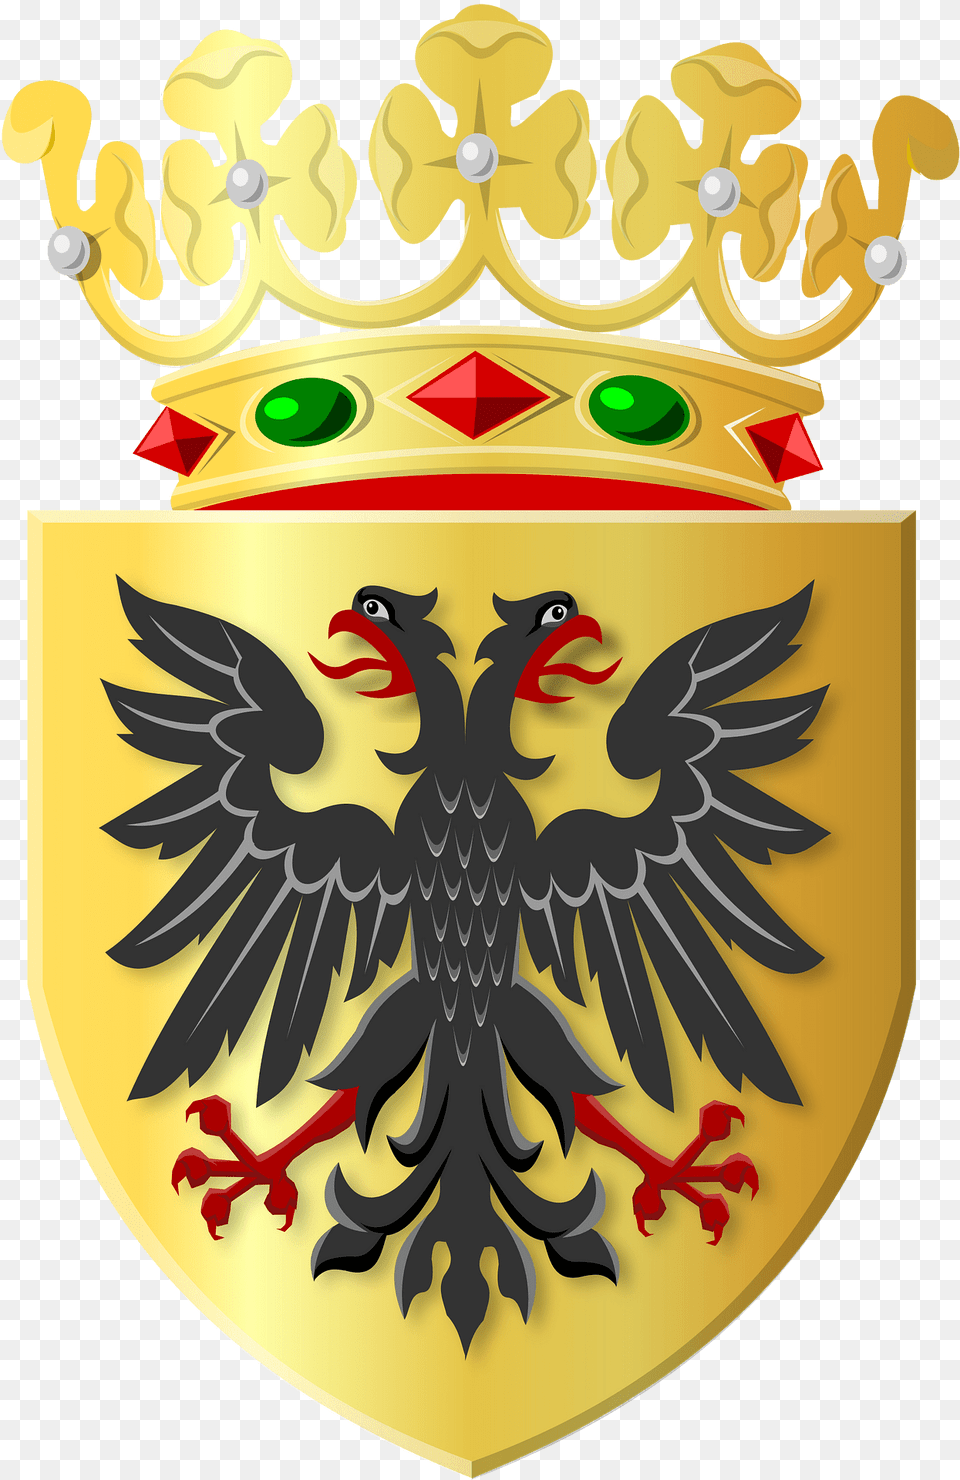 Golden Shield With Black Eagle And Golden Crown Clipart, Armor, Animal, Bird, Penguin Free Png